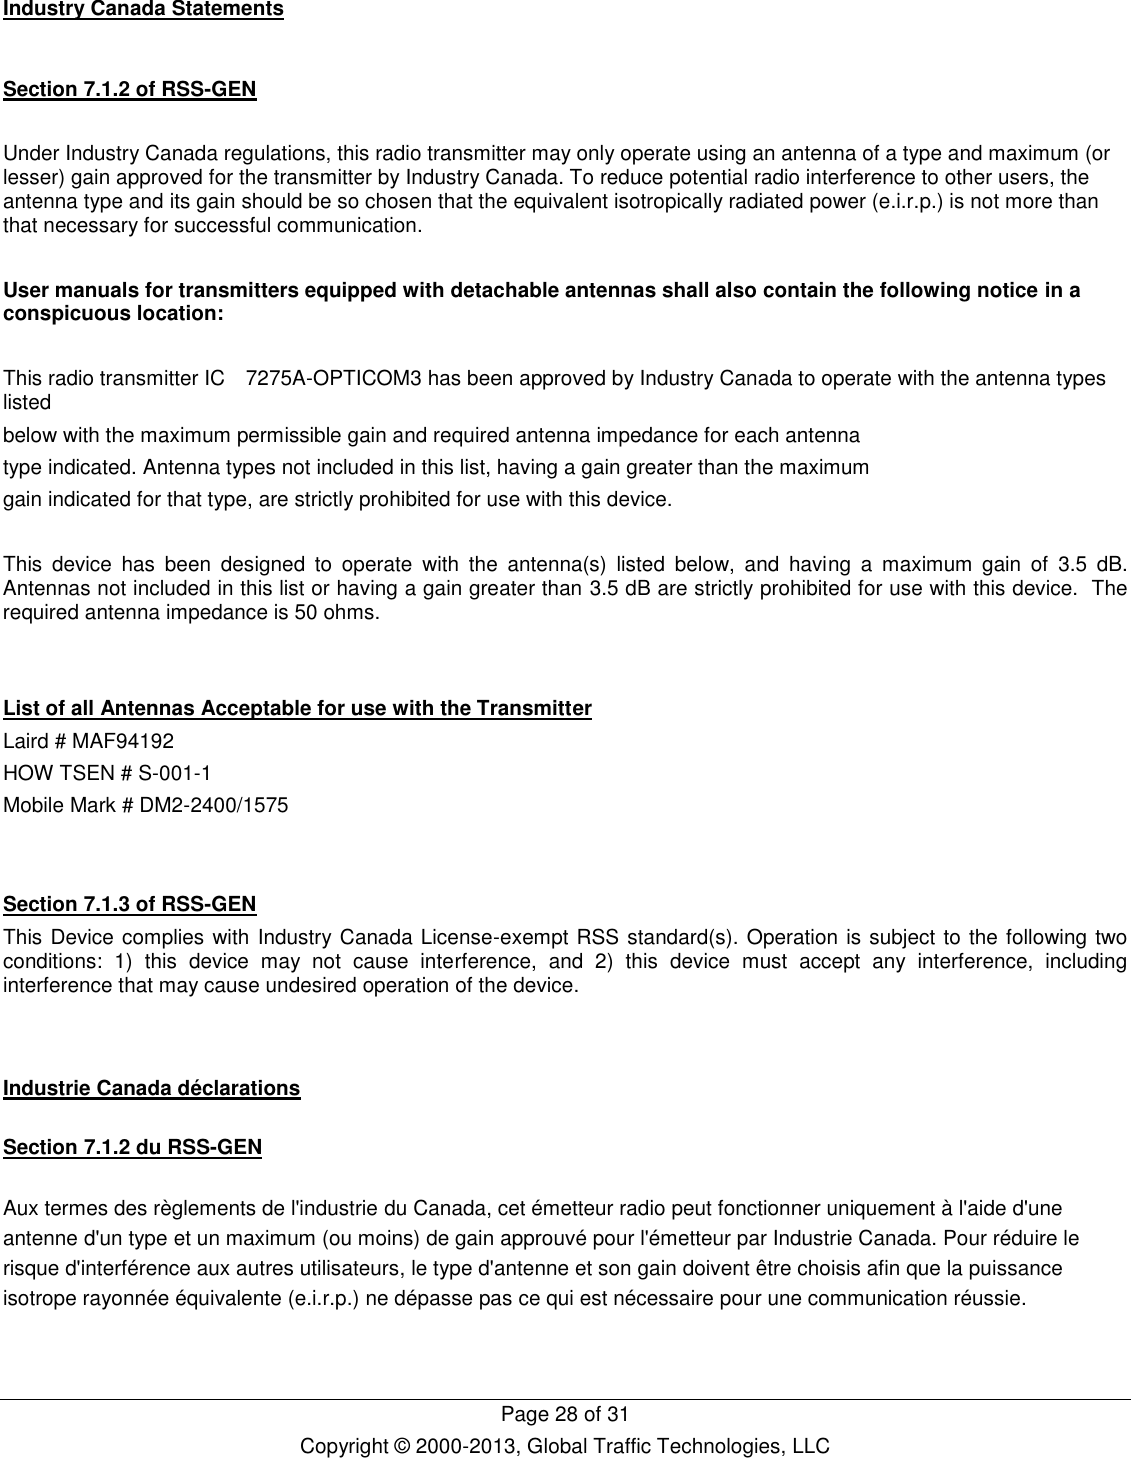   Page 28 of 31 Copyright © 2000-2013, Global Traffic Technologies, LLC Industry Canada Statements  Section 7.1.2 of RSS-GEN  Under Industry Canada regulations, this radio transmitter may only operate using an antenna of a type and maximum (or lesser) gain approved for the transmitter by Industry Canada. To reduce potential radio interference to other users, the antenna type and its gain should be so chosen that the equivalent isotropically radiated power (e.i.r.p.) is not more than that necessary for successful communication.  User manuals for transmitters equipped with detachable antennas shall also contain the following notice in a conspicuous location:  This radio transmitter IC󲄁7275A-OPTICOM3 has been approved by Industry Canada to operate with the antenna types listed below with the maximum permissible gain and required antenna impedance for each antenna type indicated. Antenna types not included in this list, having a gain greater than the maximum gain indicated for that type, are strictly prohibited for use with this device.  This  device  has  been  designed  to  operate  with  the  antenna(s)  listed  below,  and  having  a  maximum  gain  of  3.5 dB.  Antennas not included in this list or having a gain greater than 3.5 dB are strictly prohibited for use with this device.  The required antenna impedance is 50 ohms.   List of all Antennas Acceptable for use with the Transmitter Laird # MAF94192 HOW TSEN # S-001-1 Mobile Mark # DM2-2400/1575    Section 7.1.3 of RSS-GEN This Device complies with Industry Canada License-exempt RSS standard(s). Operation is subject to the following two conditions:  1)  this  device  may  not  cause  interference,  and  2)  this  device  must  accept  any  interference,  including interference that may cause undesired operation of the device.   Industrie Canada déclarations  Section 7.1.2 du RSS-GEN  Aux termes des règlements de l&apos;industrie du Canada, cet émetteur radio peut fonctionner uniquement à l&apos;aide d&apos;une antenne d&apos;un type et un maximum (ou moins) de gain approuvé pour l&apos;émetteur par Industrie Canada. Pour réduire le risque d&apos;interférence aux autres utilisateurs, le type d&apos;antenne et son gain doivent être choisis afin que la puissance isotrope rayonnée équivalente (e.i.r.p.) ne dépasse pas ce qui est nécessaire pour une communication réussie.  